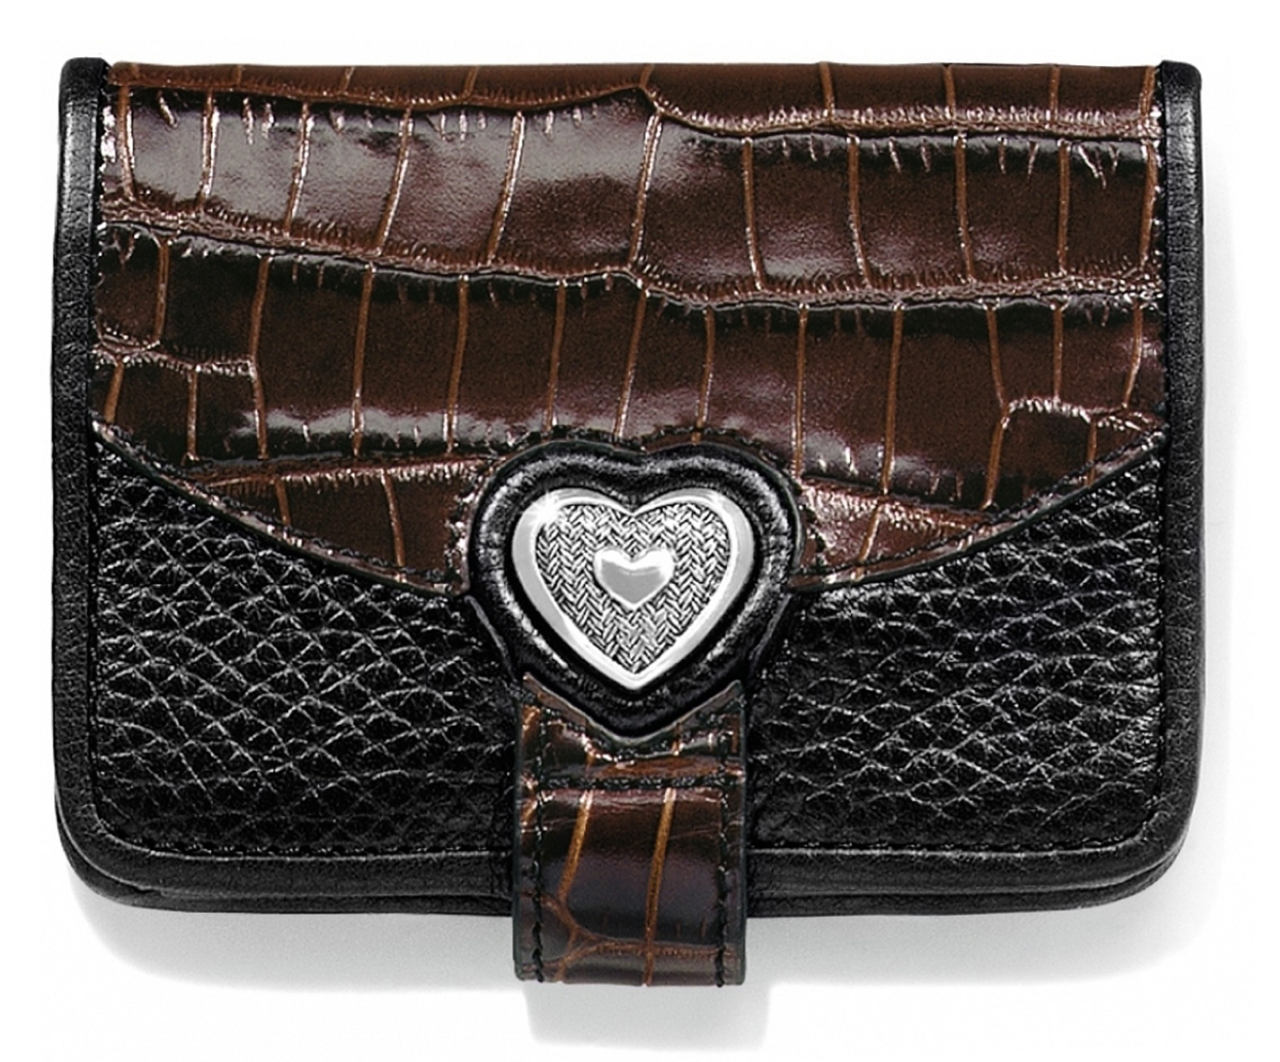 Brighton Brown Patent Leather Wallet Coin Purse With Silver Heart Moc Croc  | eBay